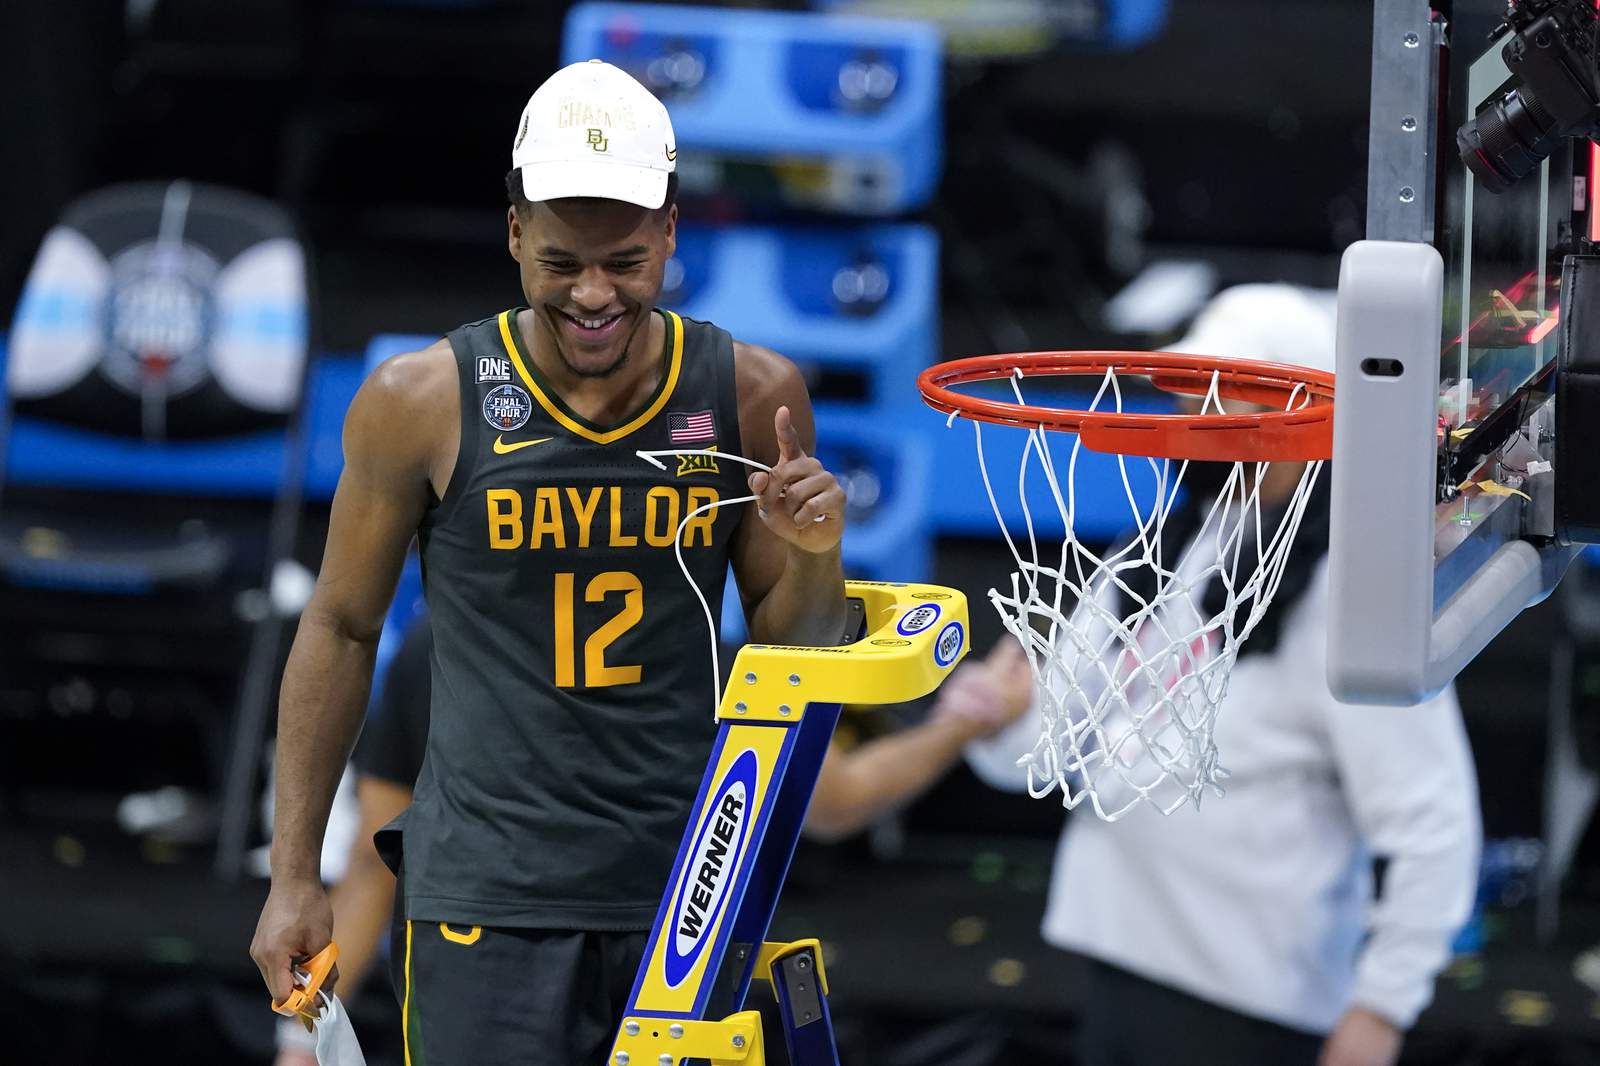 Guards stayed at Baylor, paving way for Drew's dream title